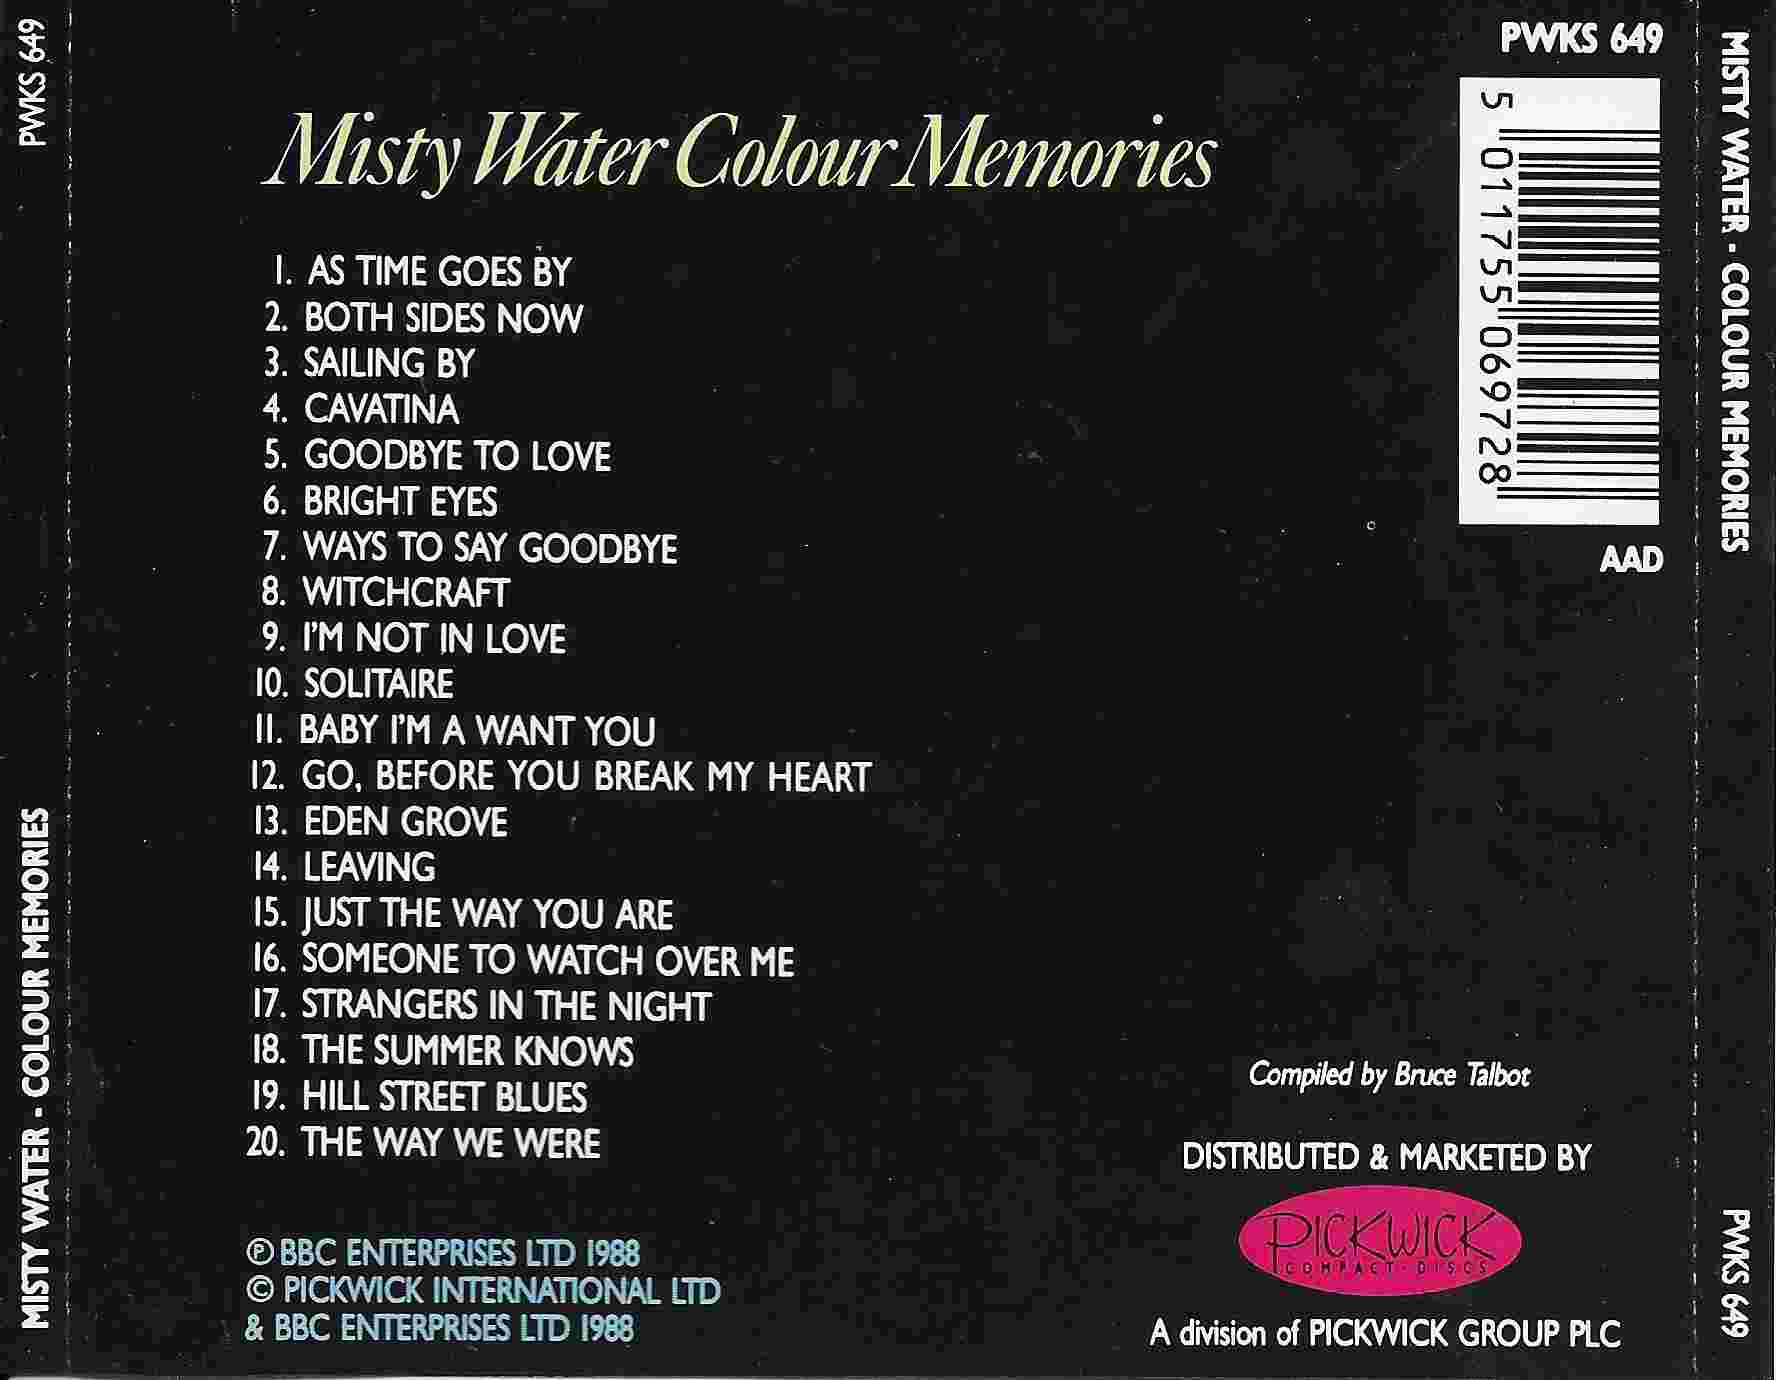 Picture of PWKS 649 Misty water - Colour memories by artist Various from the BBC records and Tapes library